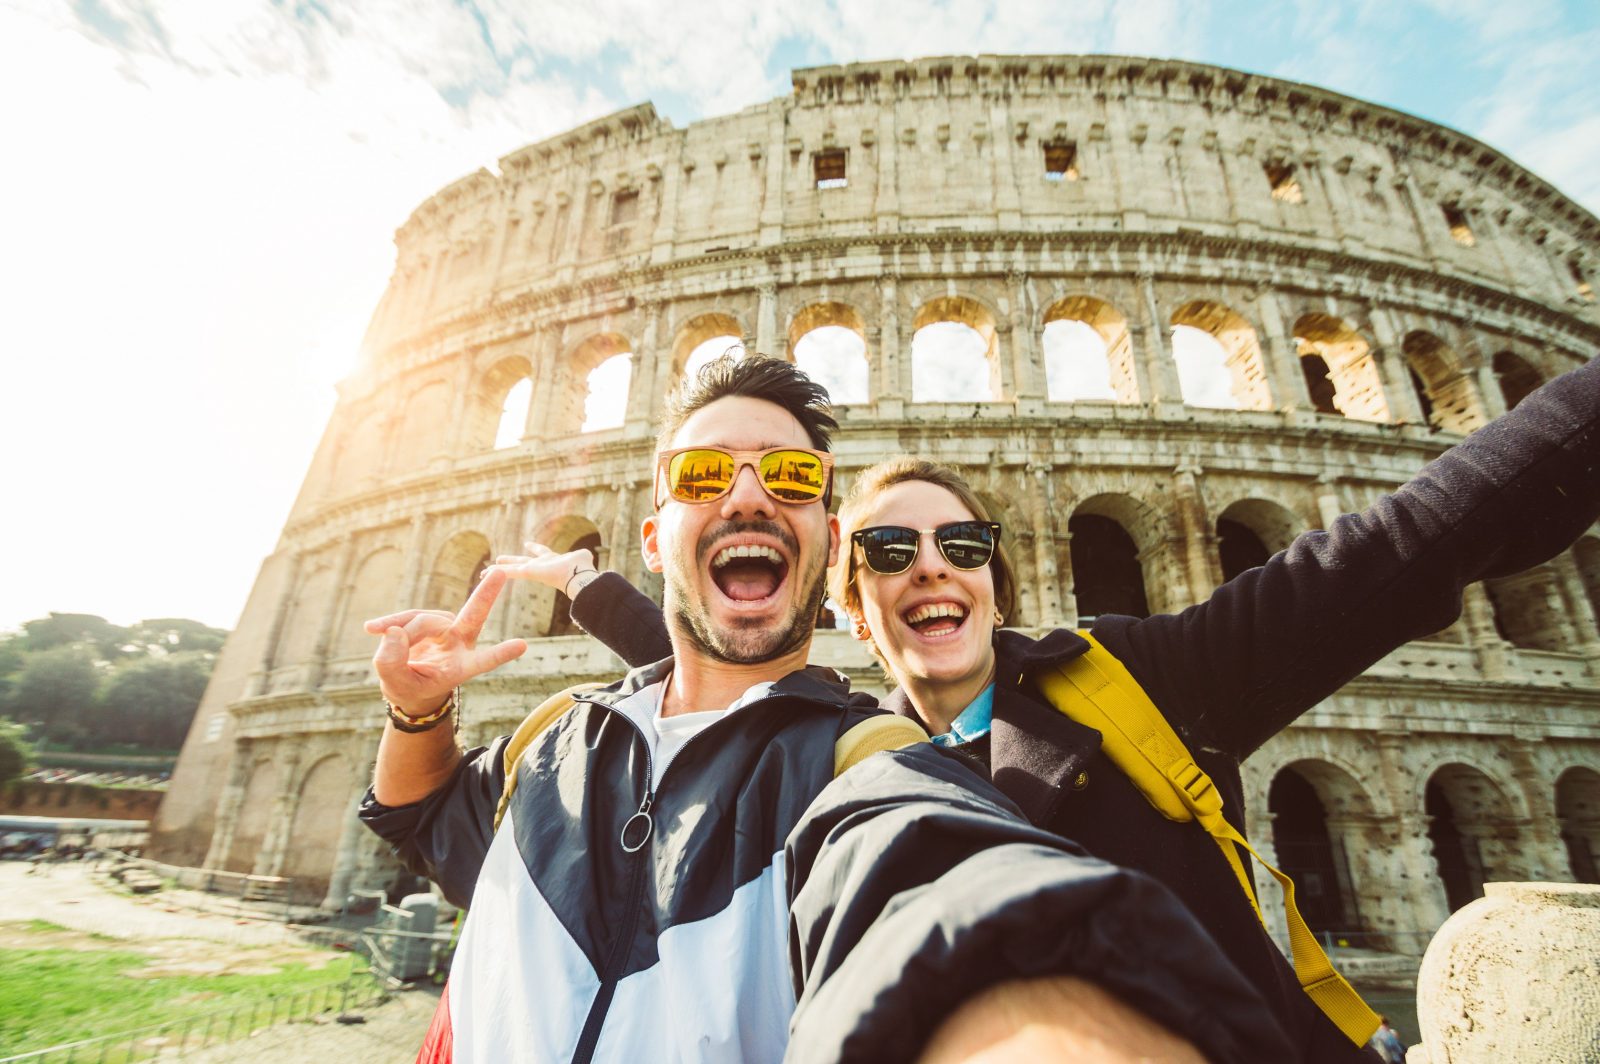 ✈️ Plan a Vacation and We’ll Tell You What to Watch on Netflix Tourists Taking Selfie In Rome, Italy